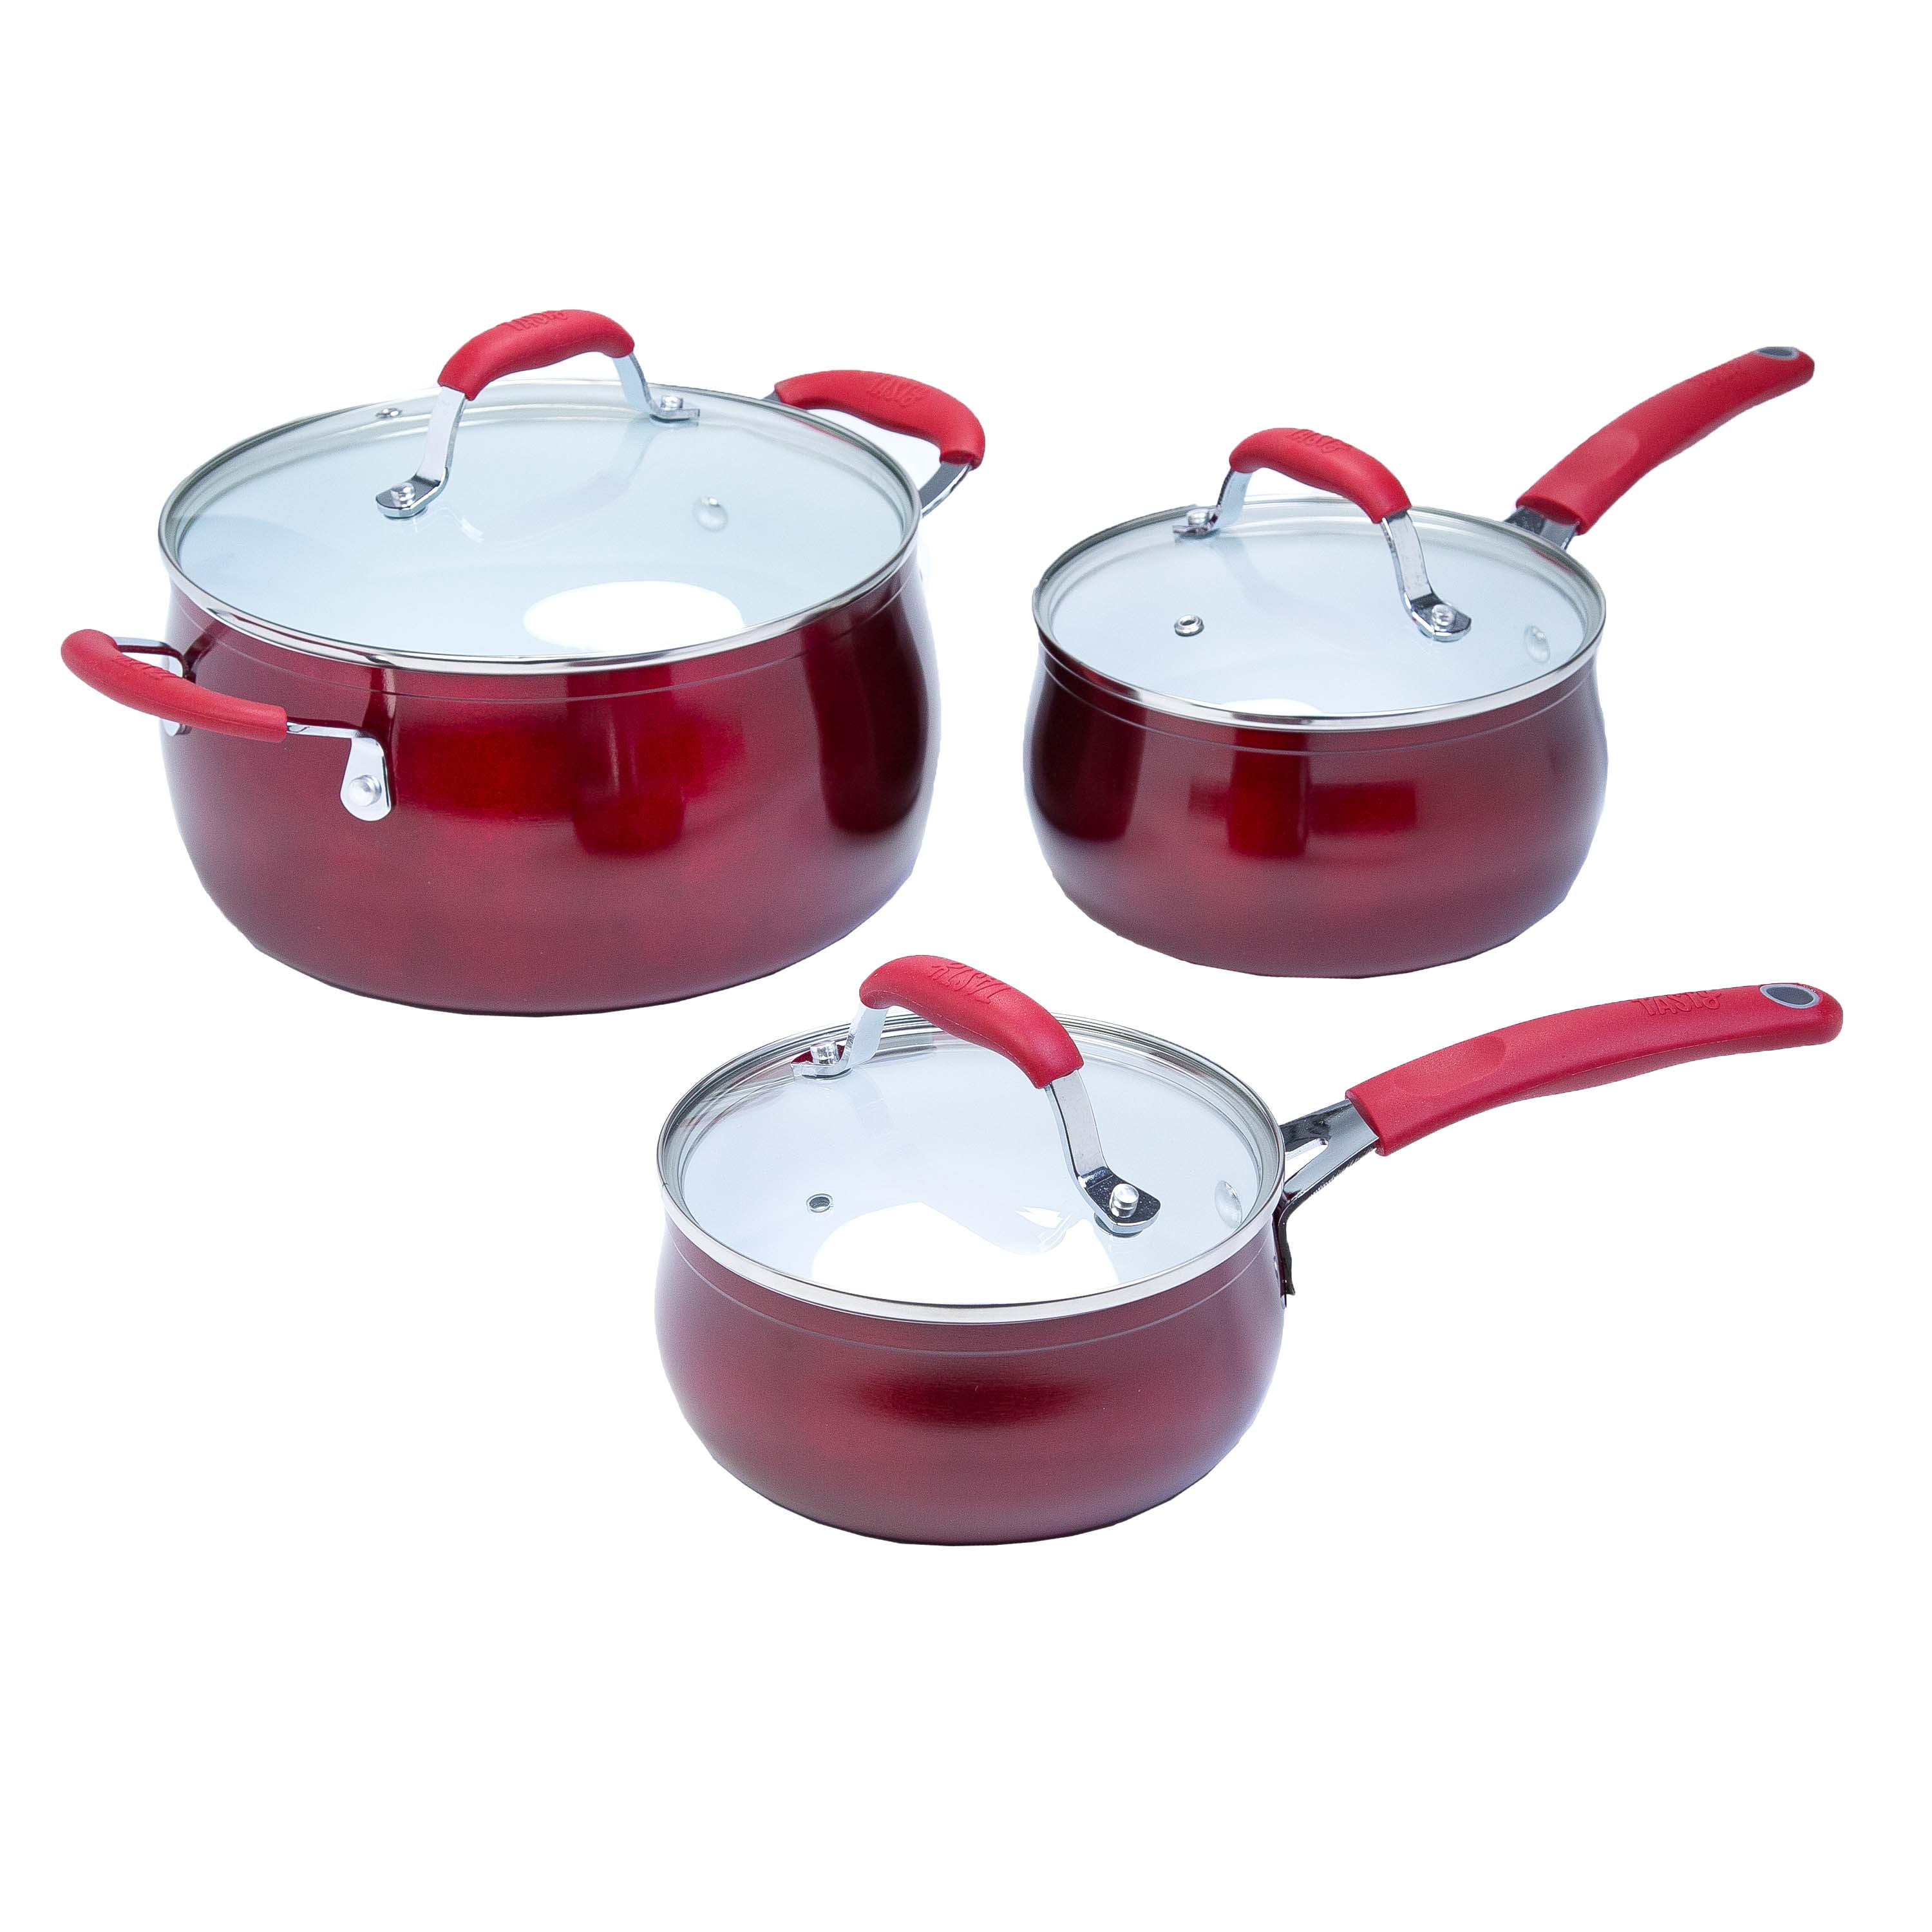 Redchef 5-Piece Ceramic Cookware Set - Non-Stick Frying Pots and Pans -  Stackable RV Cookware Sets for Camping - Kitchen - AliExpress